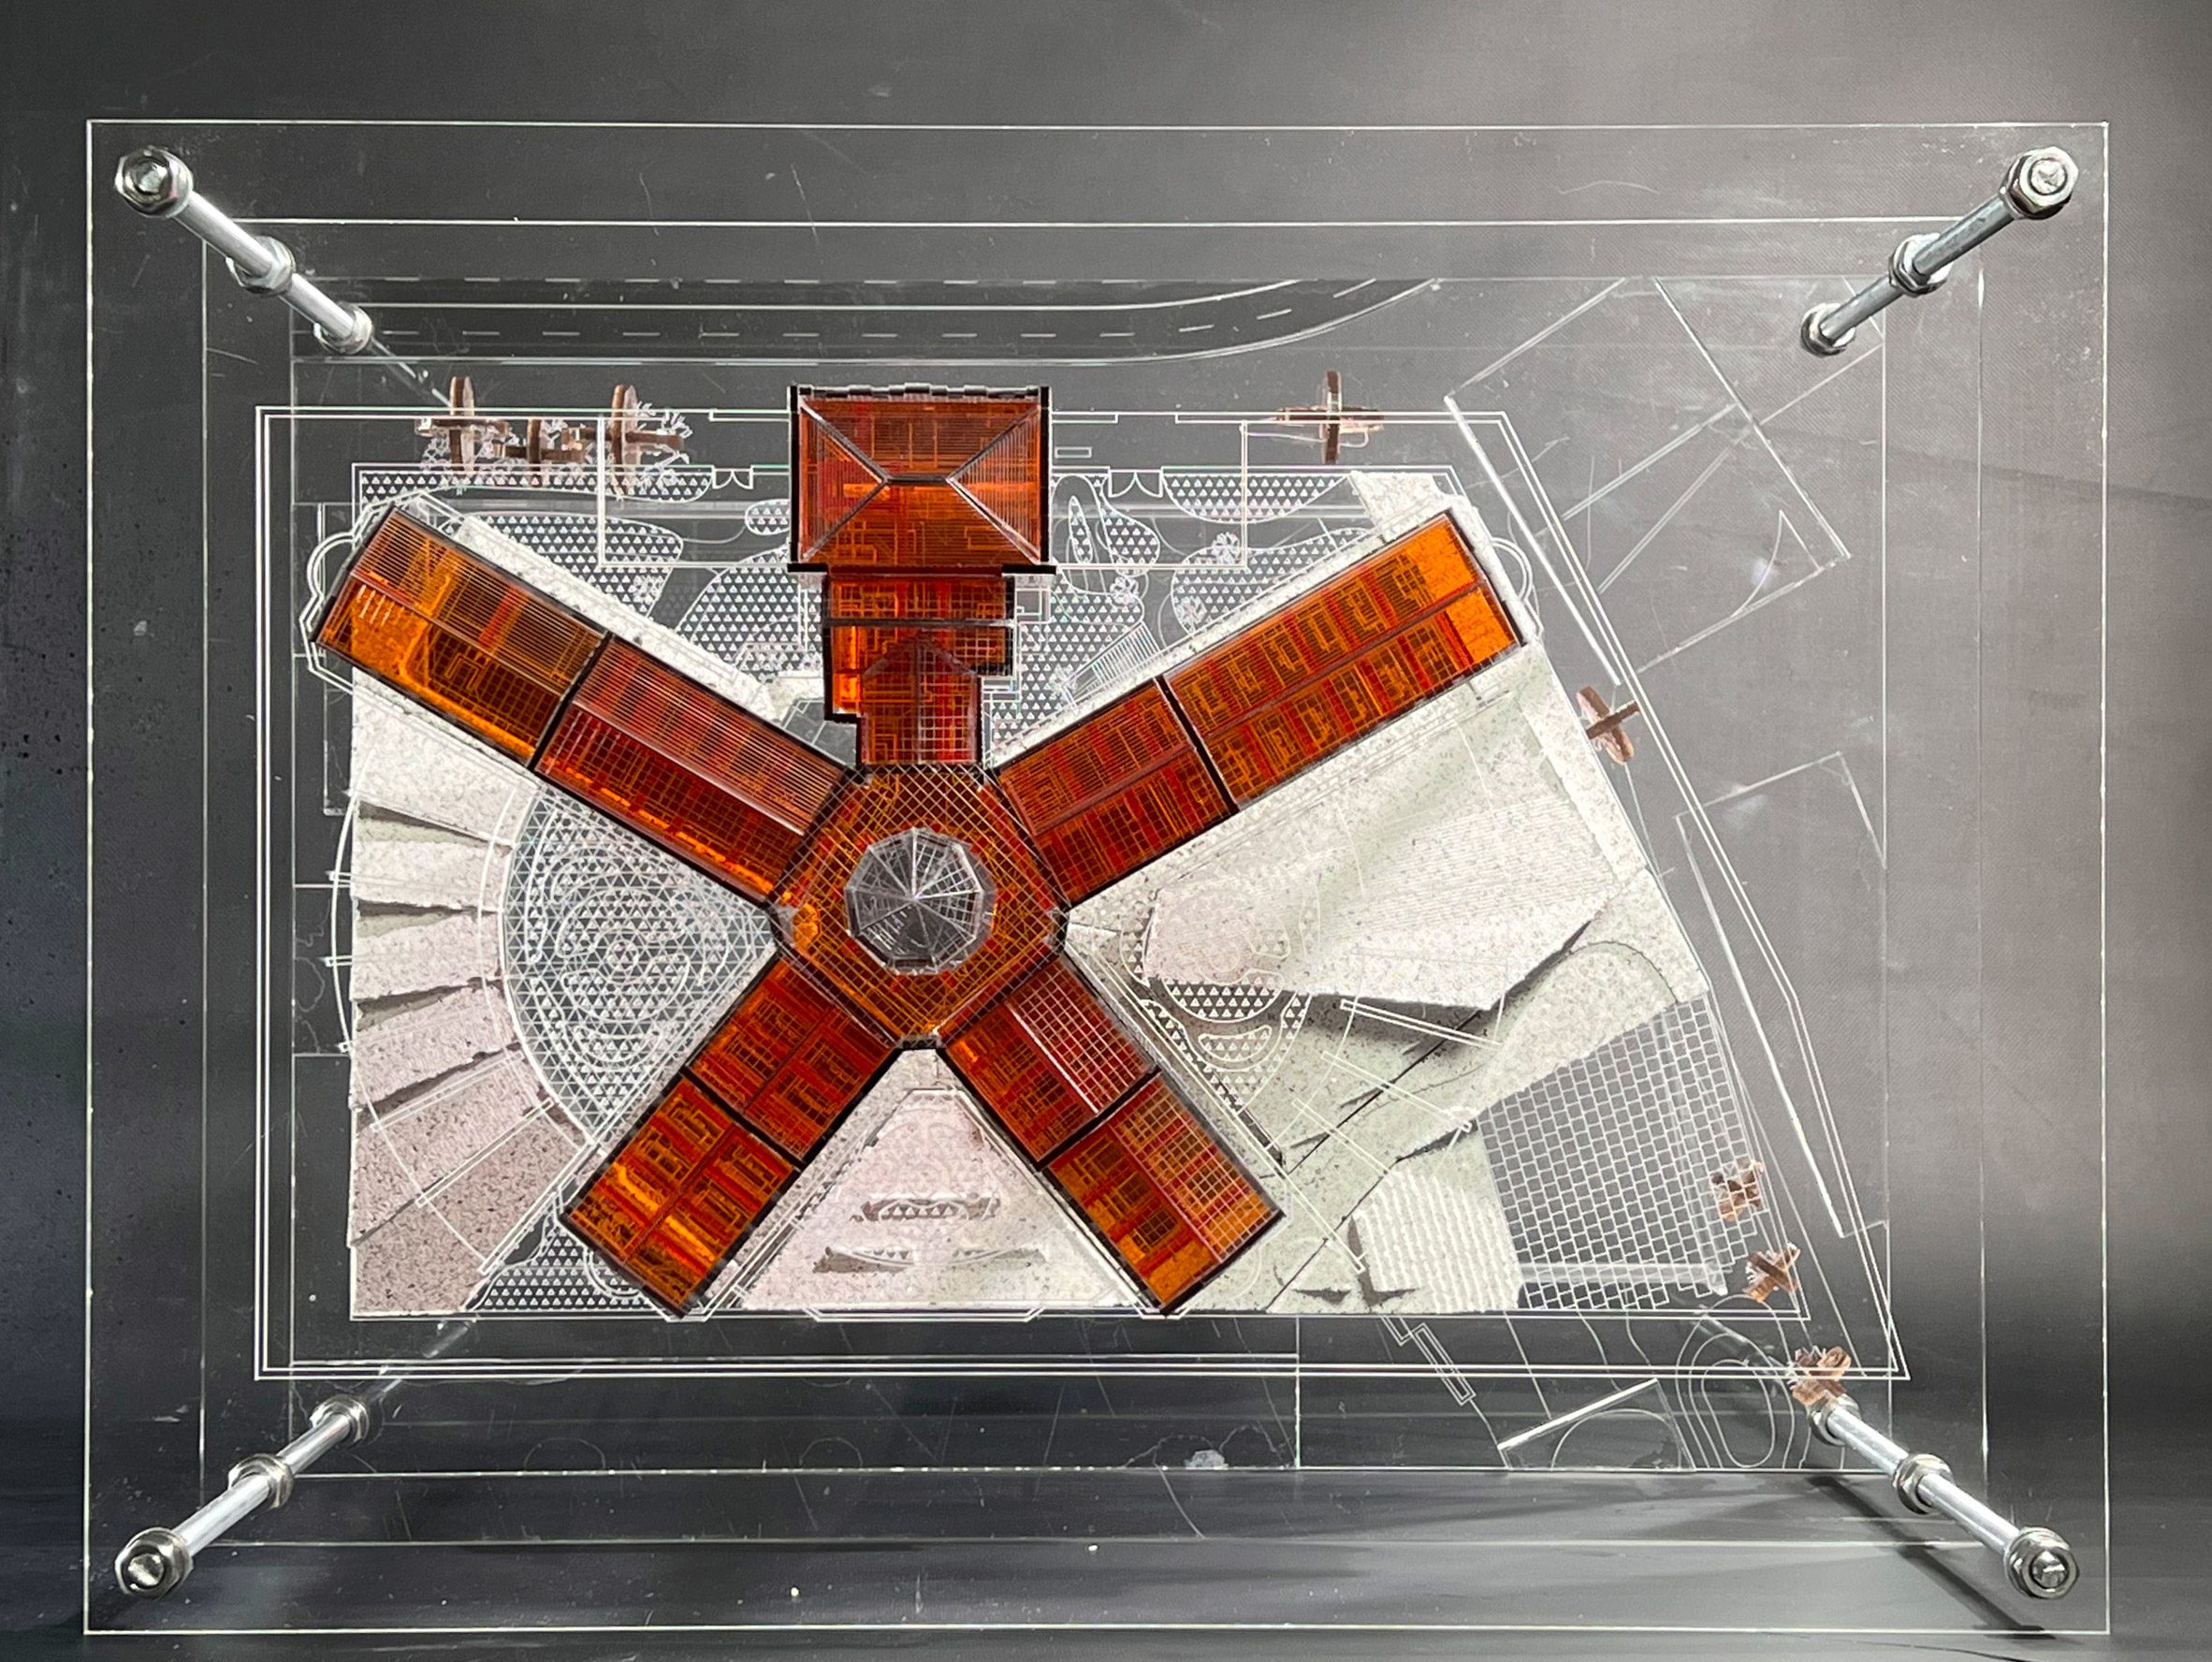 Top view of an orange star-shape architecture model presented on glass slides